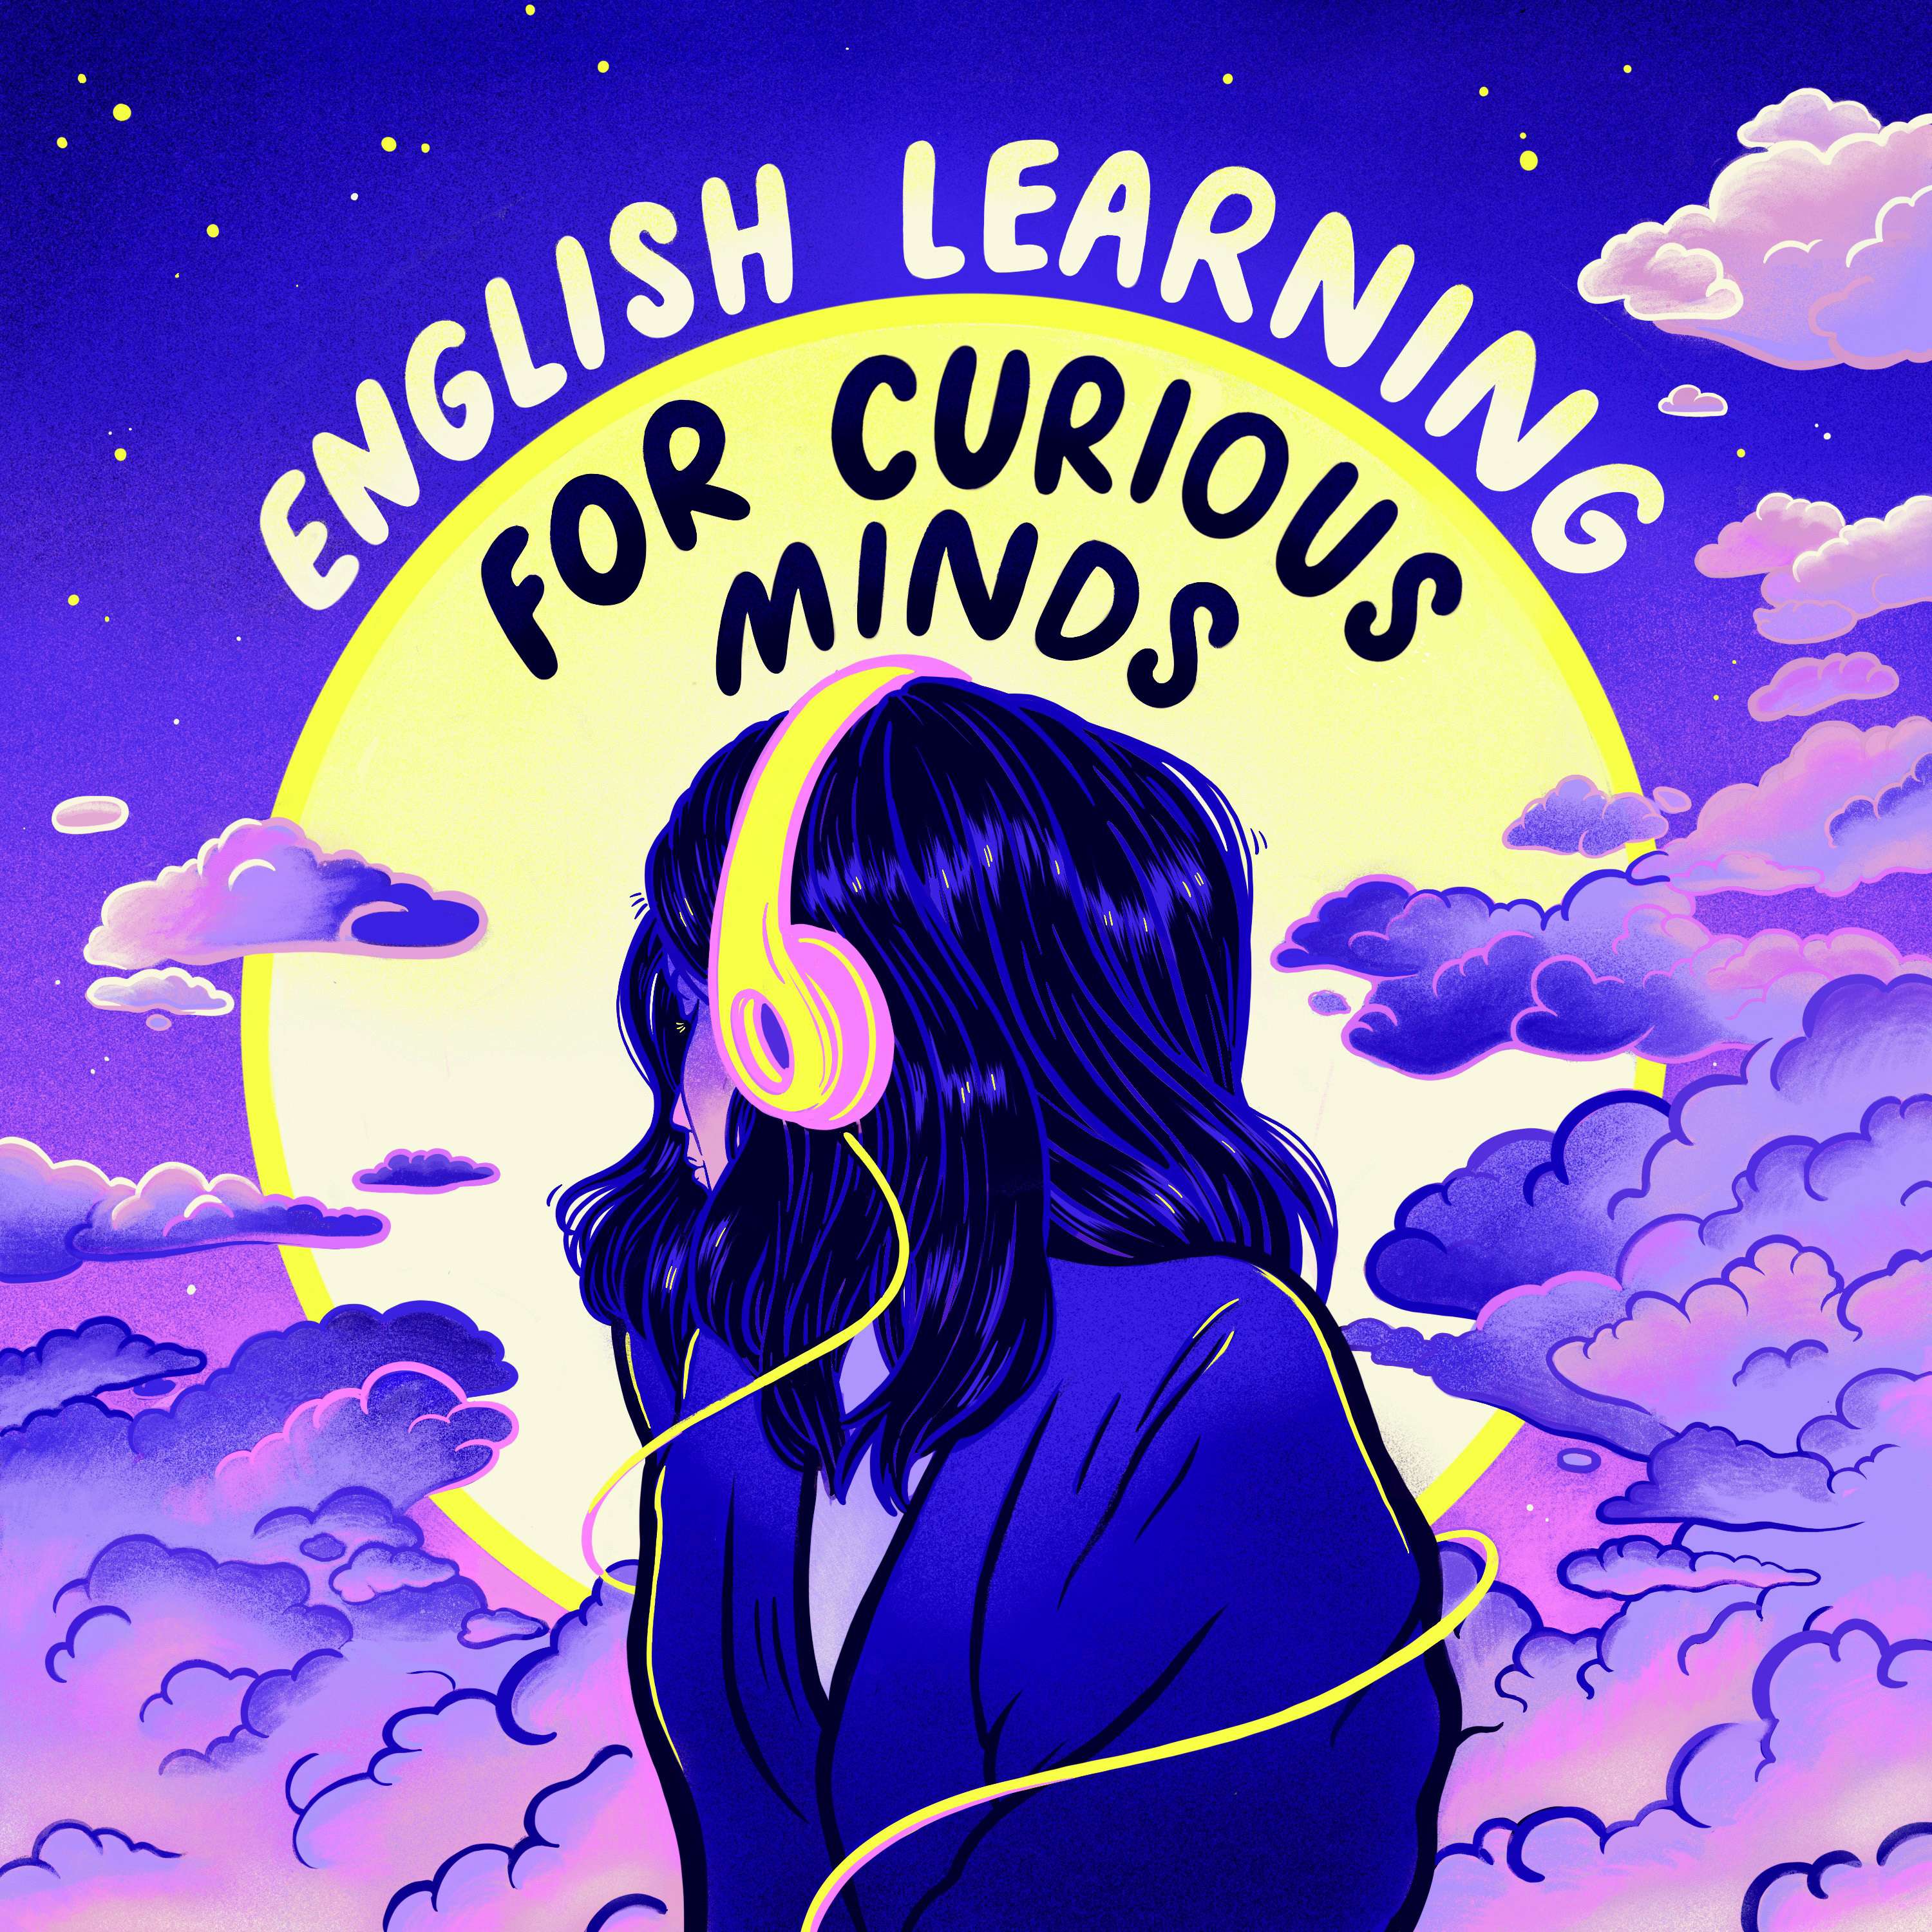 English Learning for Curious Minds